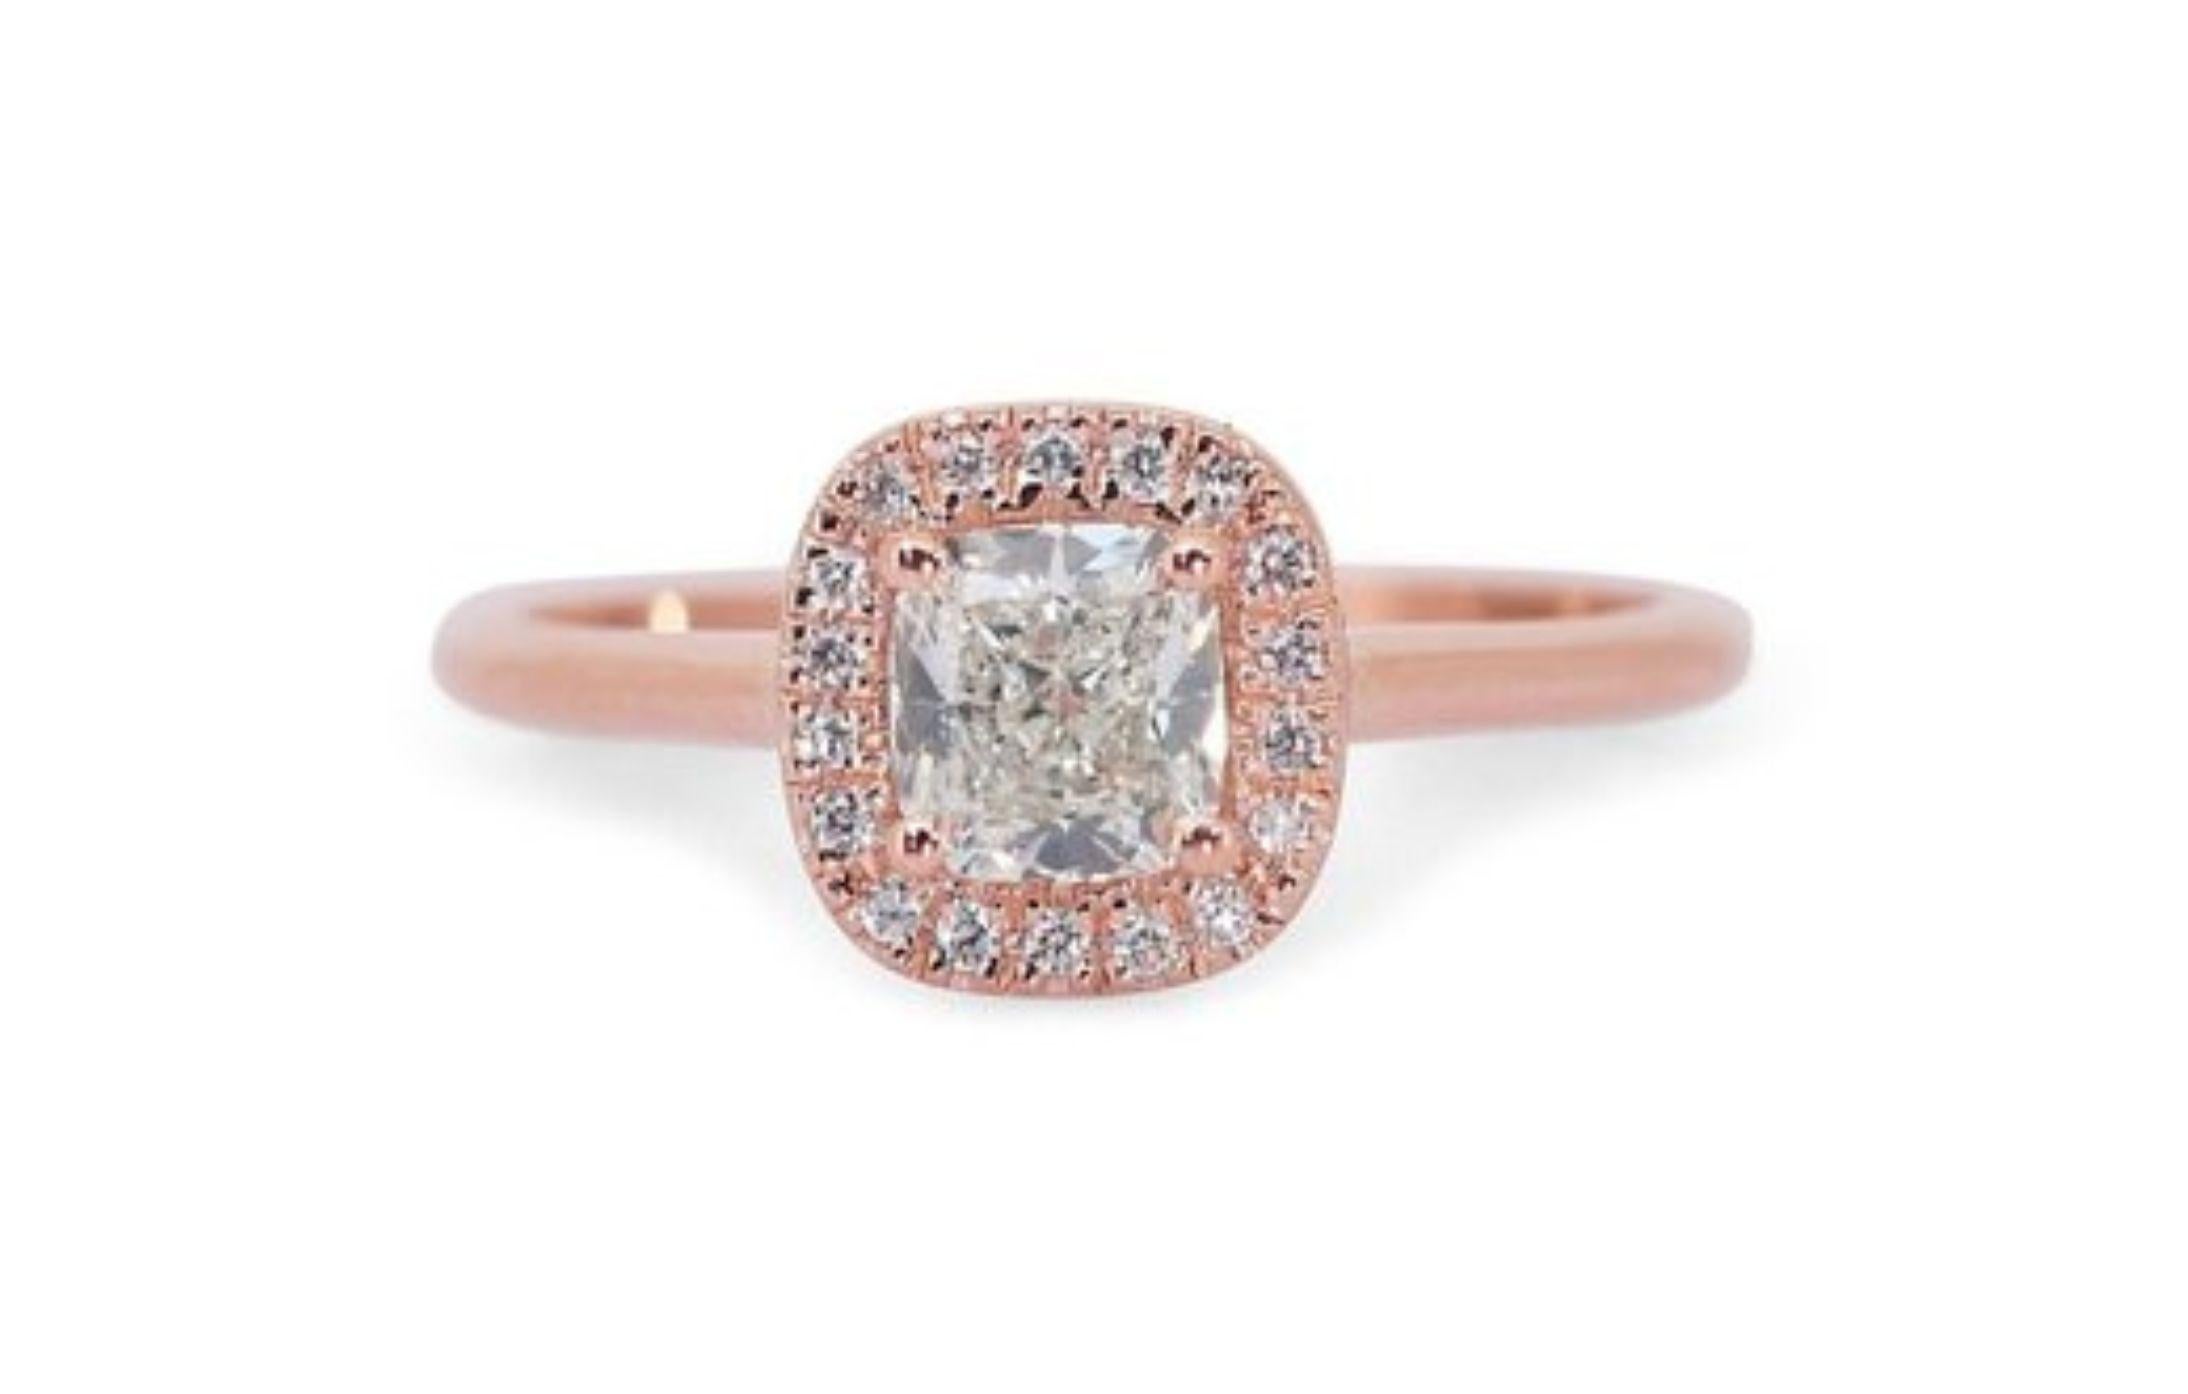 Embrace Romantic Brilliance: 1 Carat Cushion Diamond Ring with Dazzling Side Stones in 18K Pink Gold (GIA Certified)

Own a slice of pure romance with this breathtaking ring, featuring a mesmerizing 1 carat cushion modified natural diamond set in